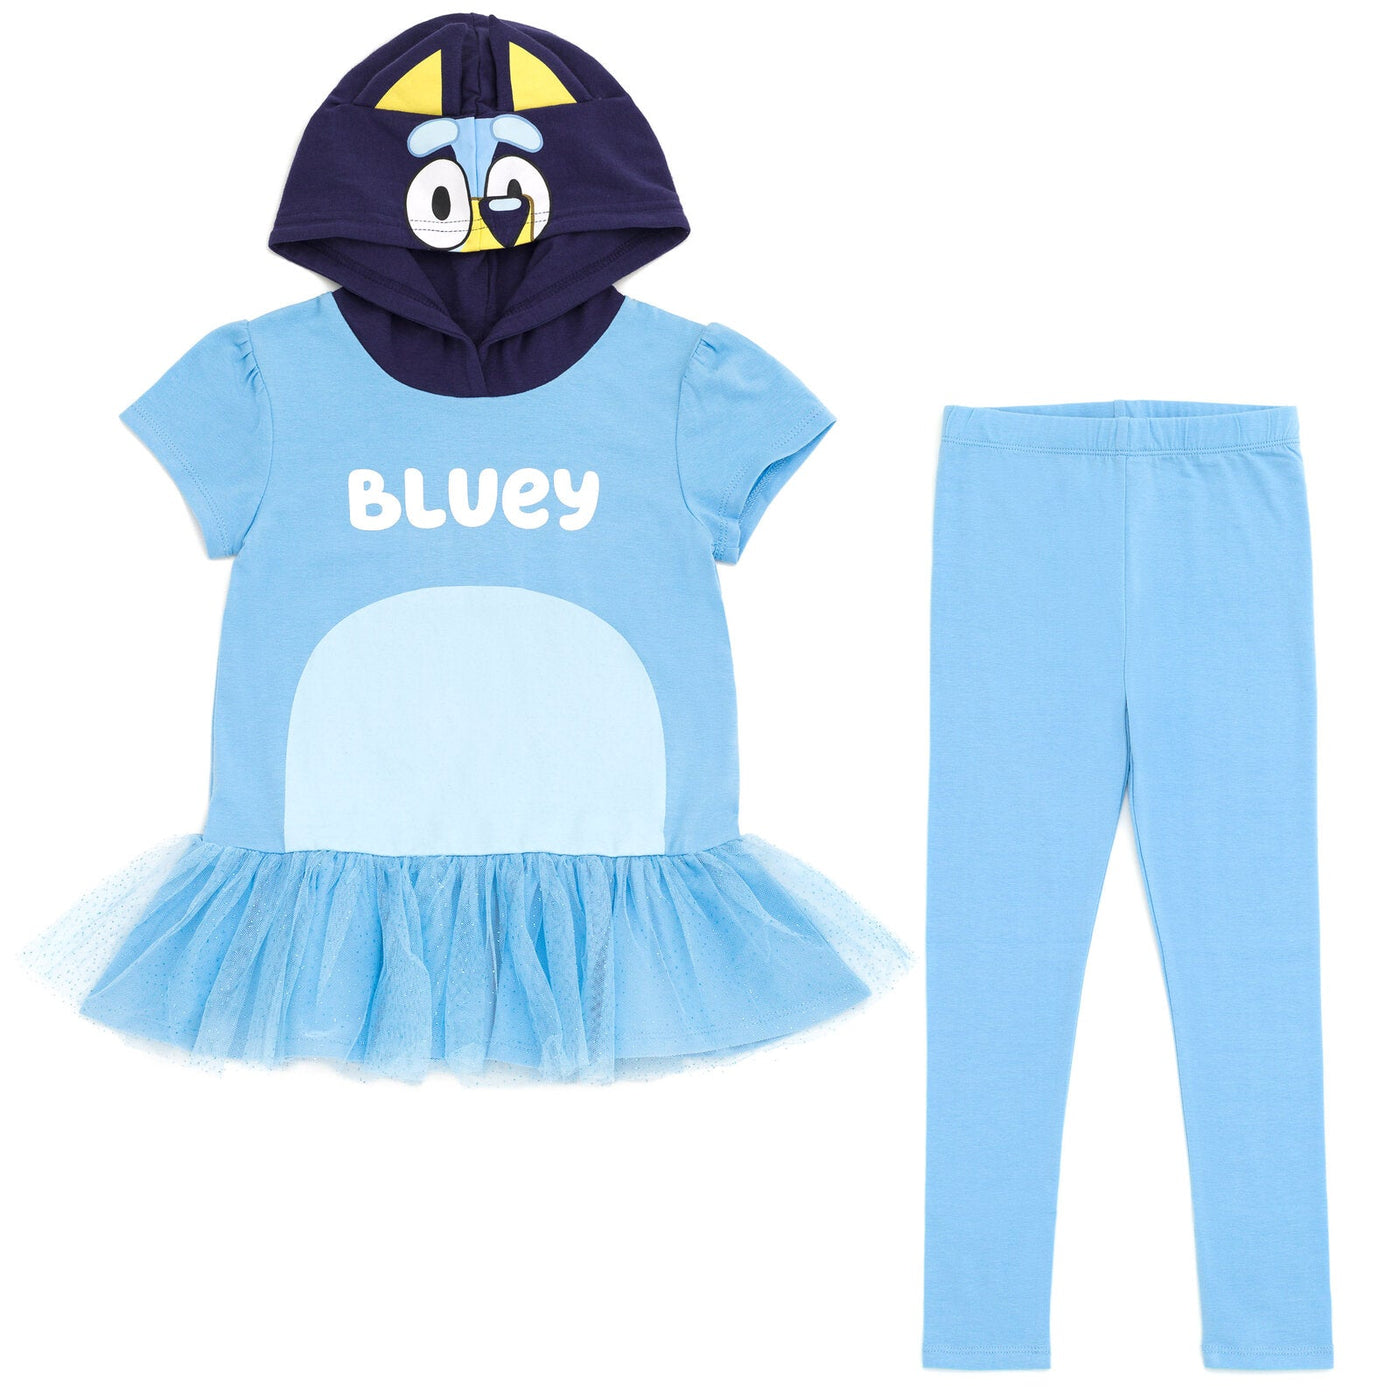 Bluey Cosplay T-Shirt Dress and Leggings Outfit Set - imagikids